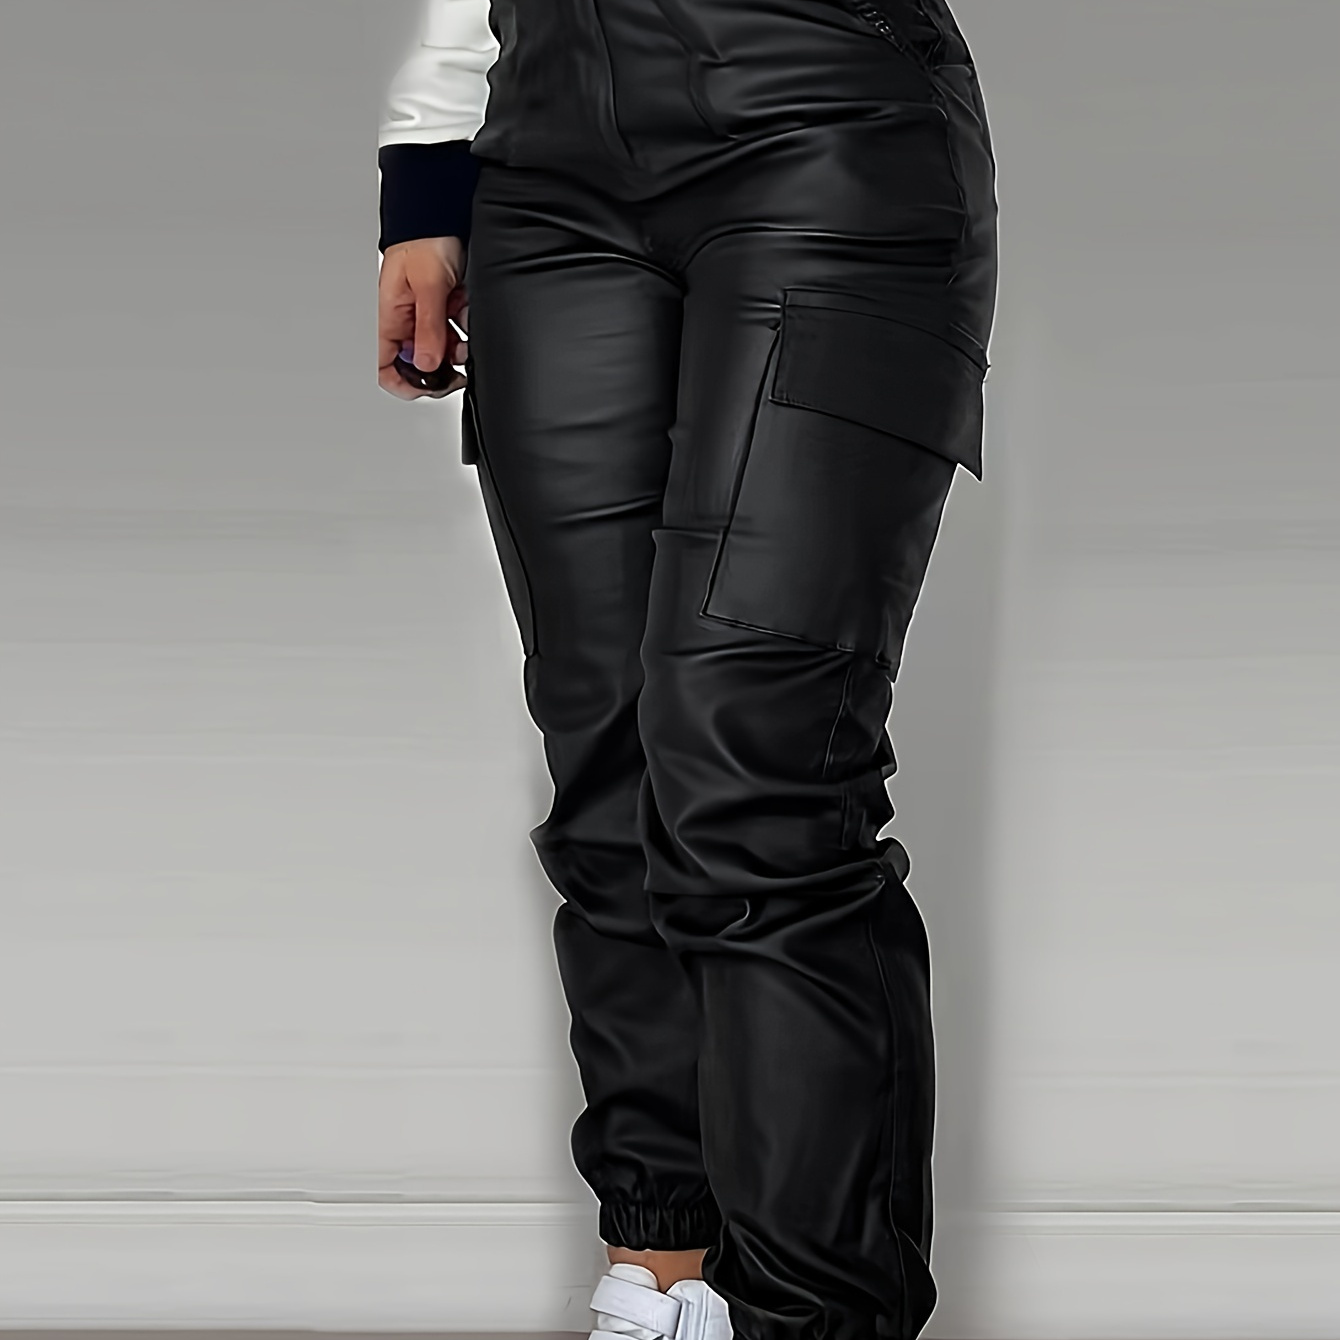 

Women's Pu Leather Motorcycle Pants, Stylish Zipper Pleated With Fashionable Side Pockets, Casual High-waisted Patch Bag Leggings, Skinny Fit, Casual Streetwear - Fall & Winter